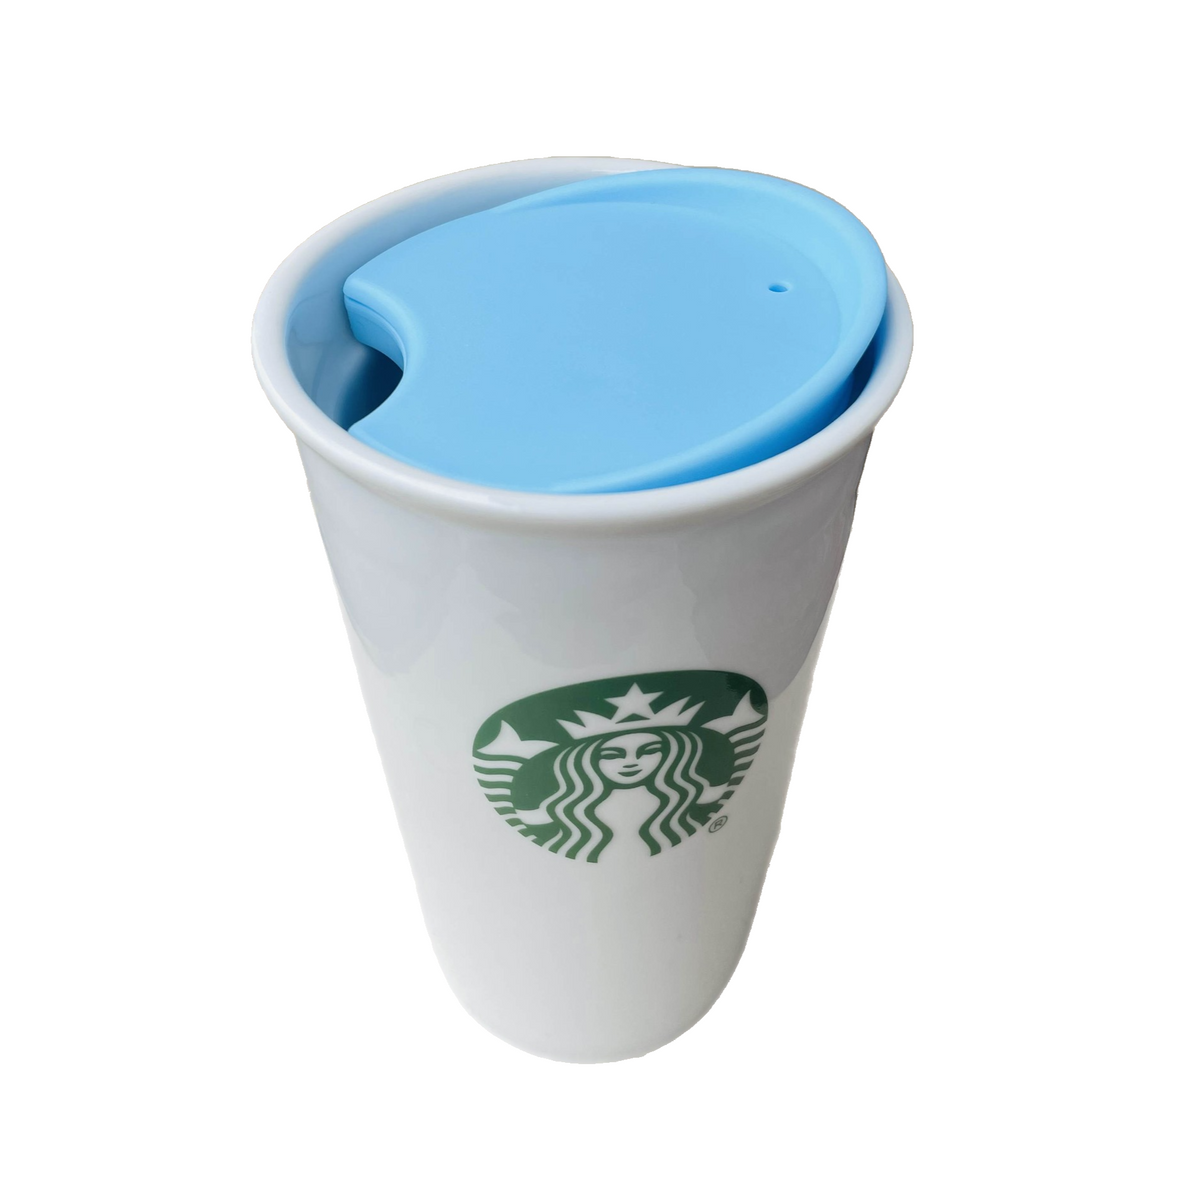 2x Starbucks 10/12/16 o.z. Ceramic Travel Tumbler REPLACEMENT LID From USA